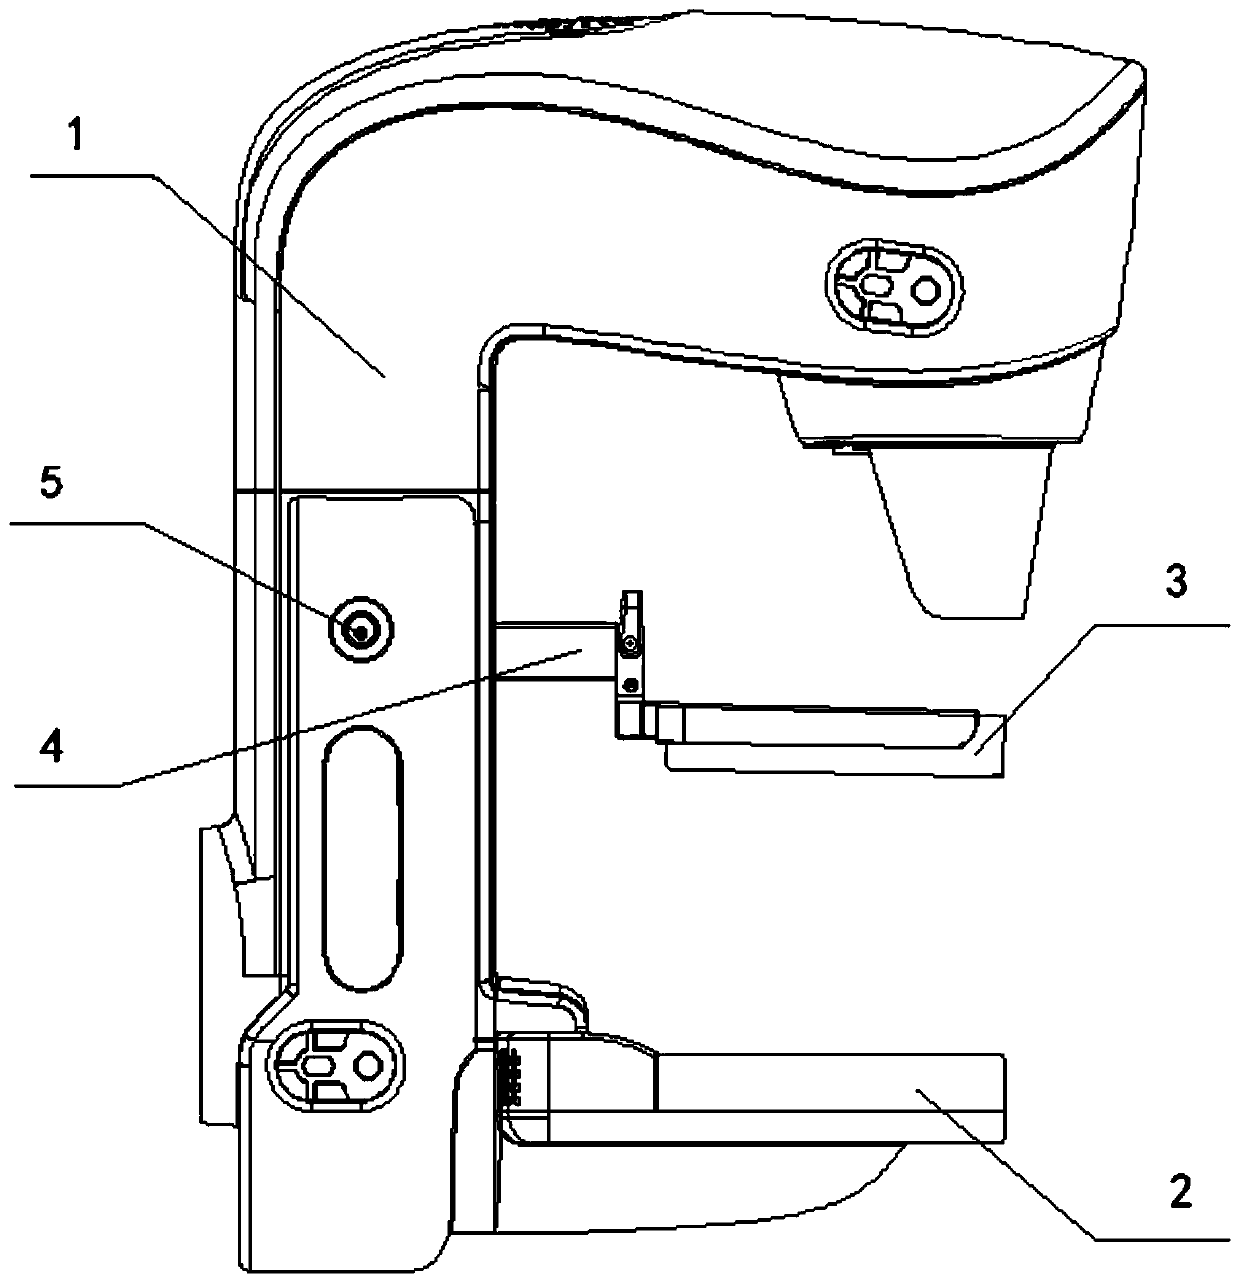 Breast oppression device and method